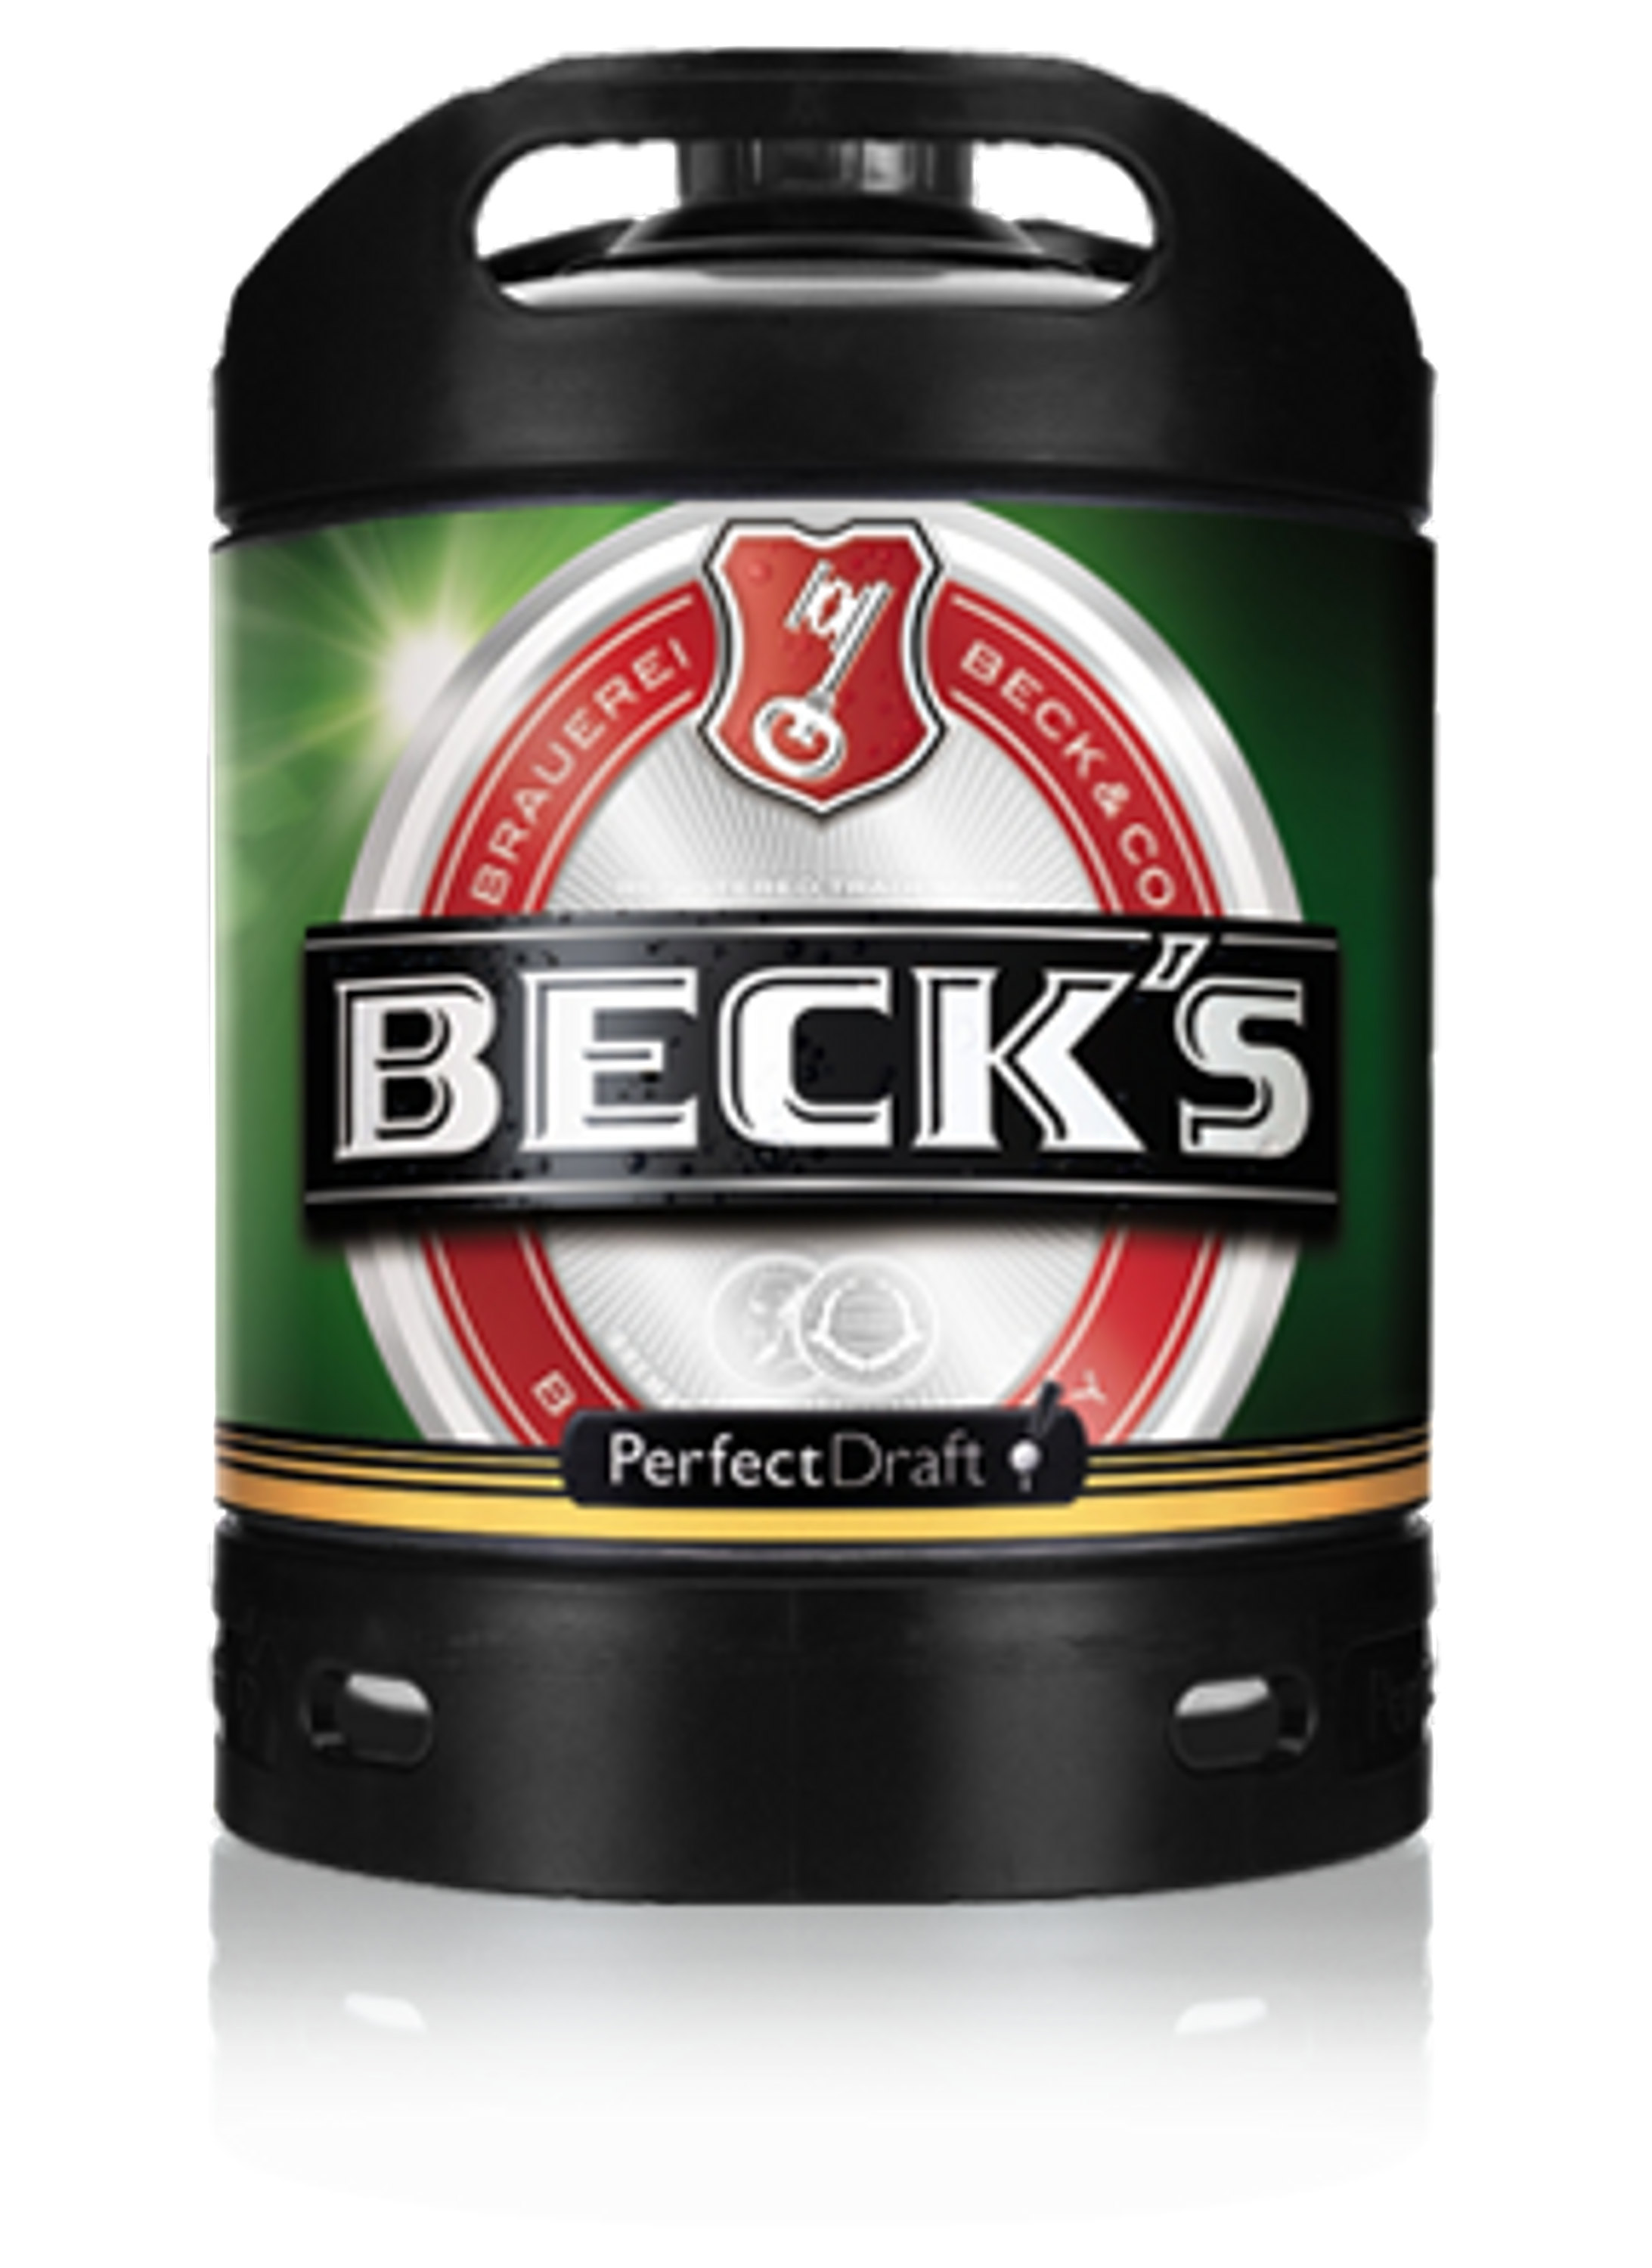 Beck's Pils Perfect Draft 6.0l, alc. 4.9% by volume